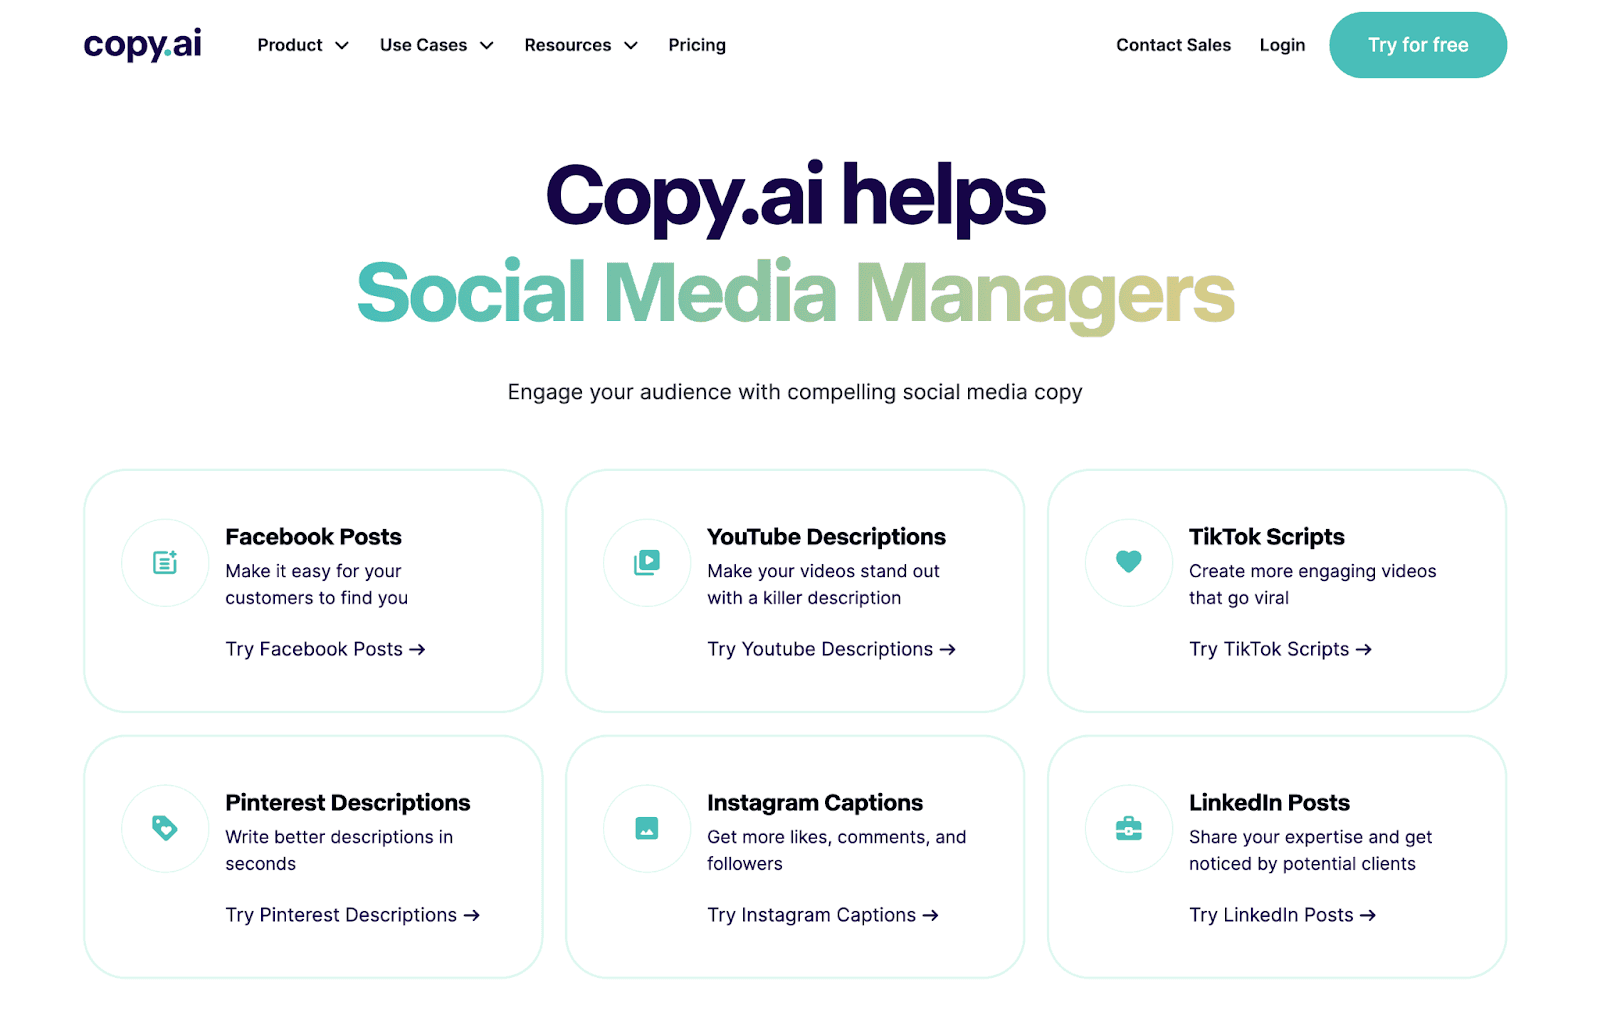 Copy.ai helps social media managers - Engage your audience with compelling social media copy